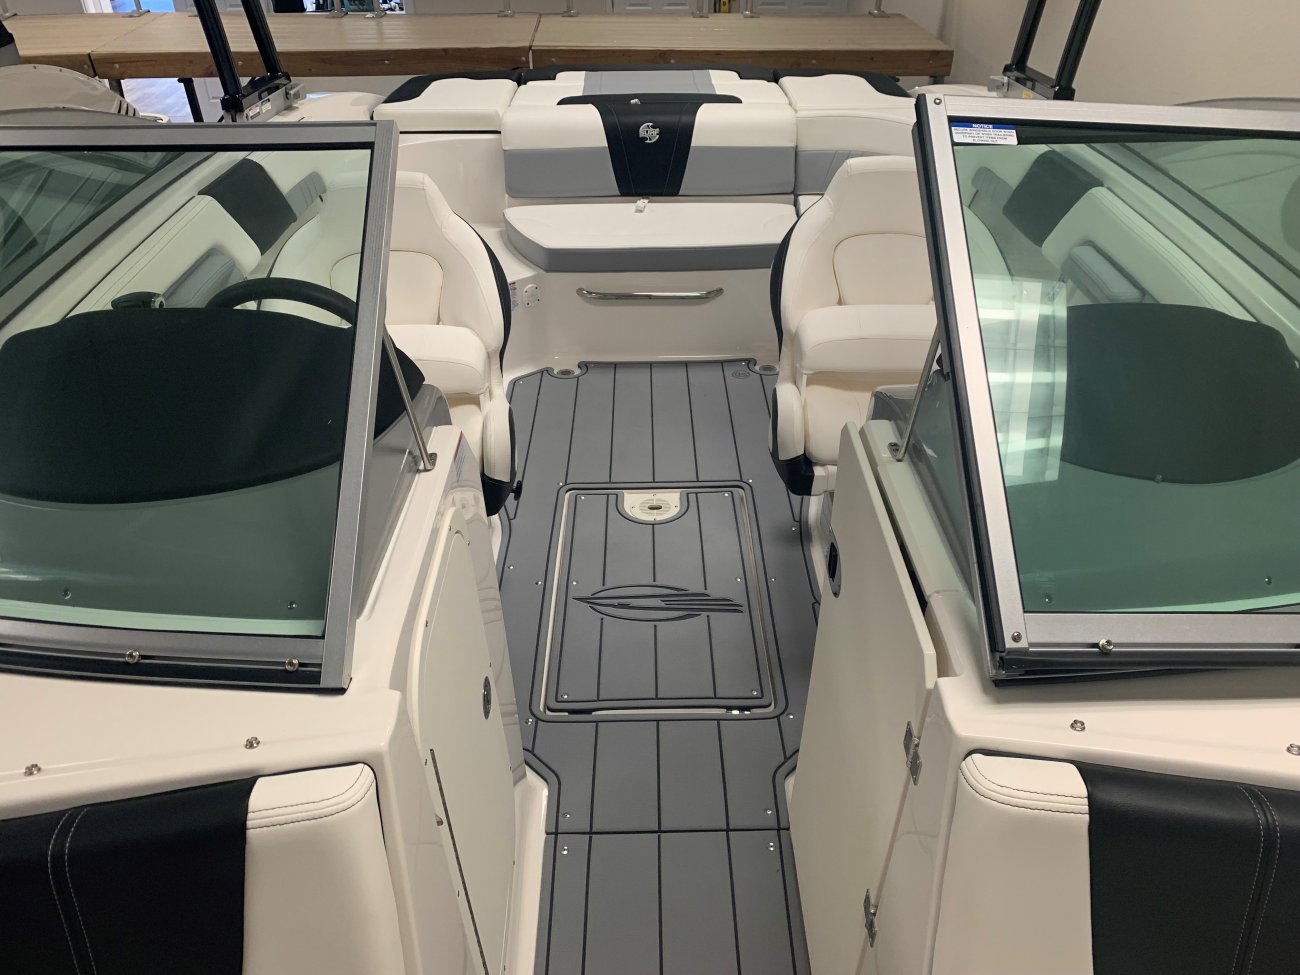 Chaparral Boats. Our track record speaks for itself. Seeing Chaparral on top when it comes to performance, styling, value and innovation should come as no surprise... we've won more than 30 awards for product excellence, a feat few can claim.